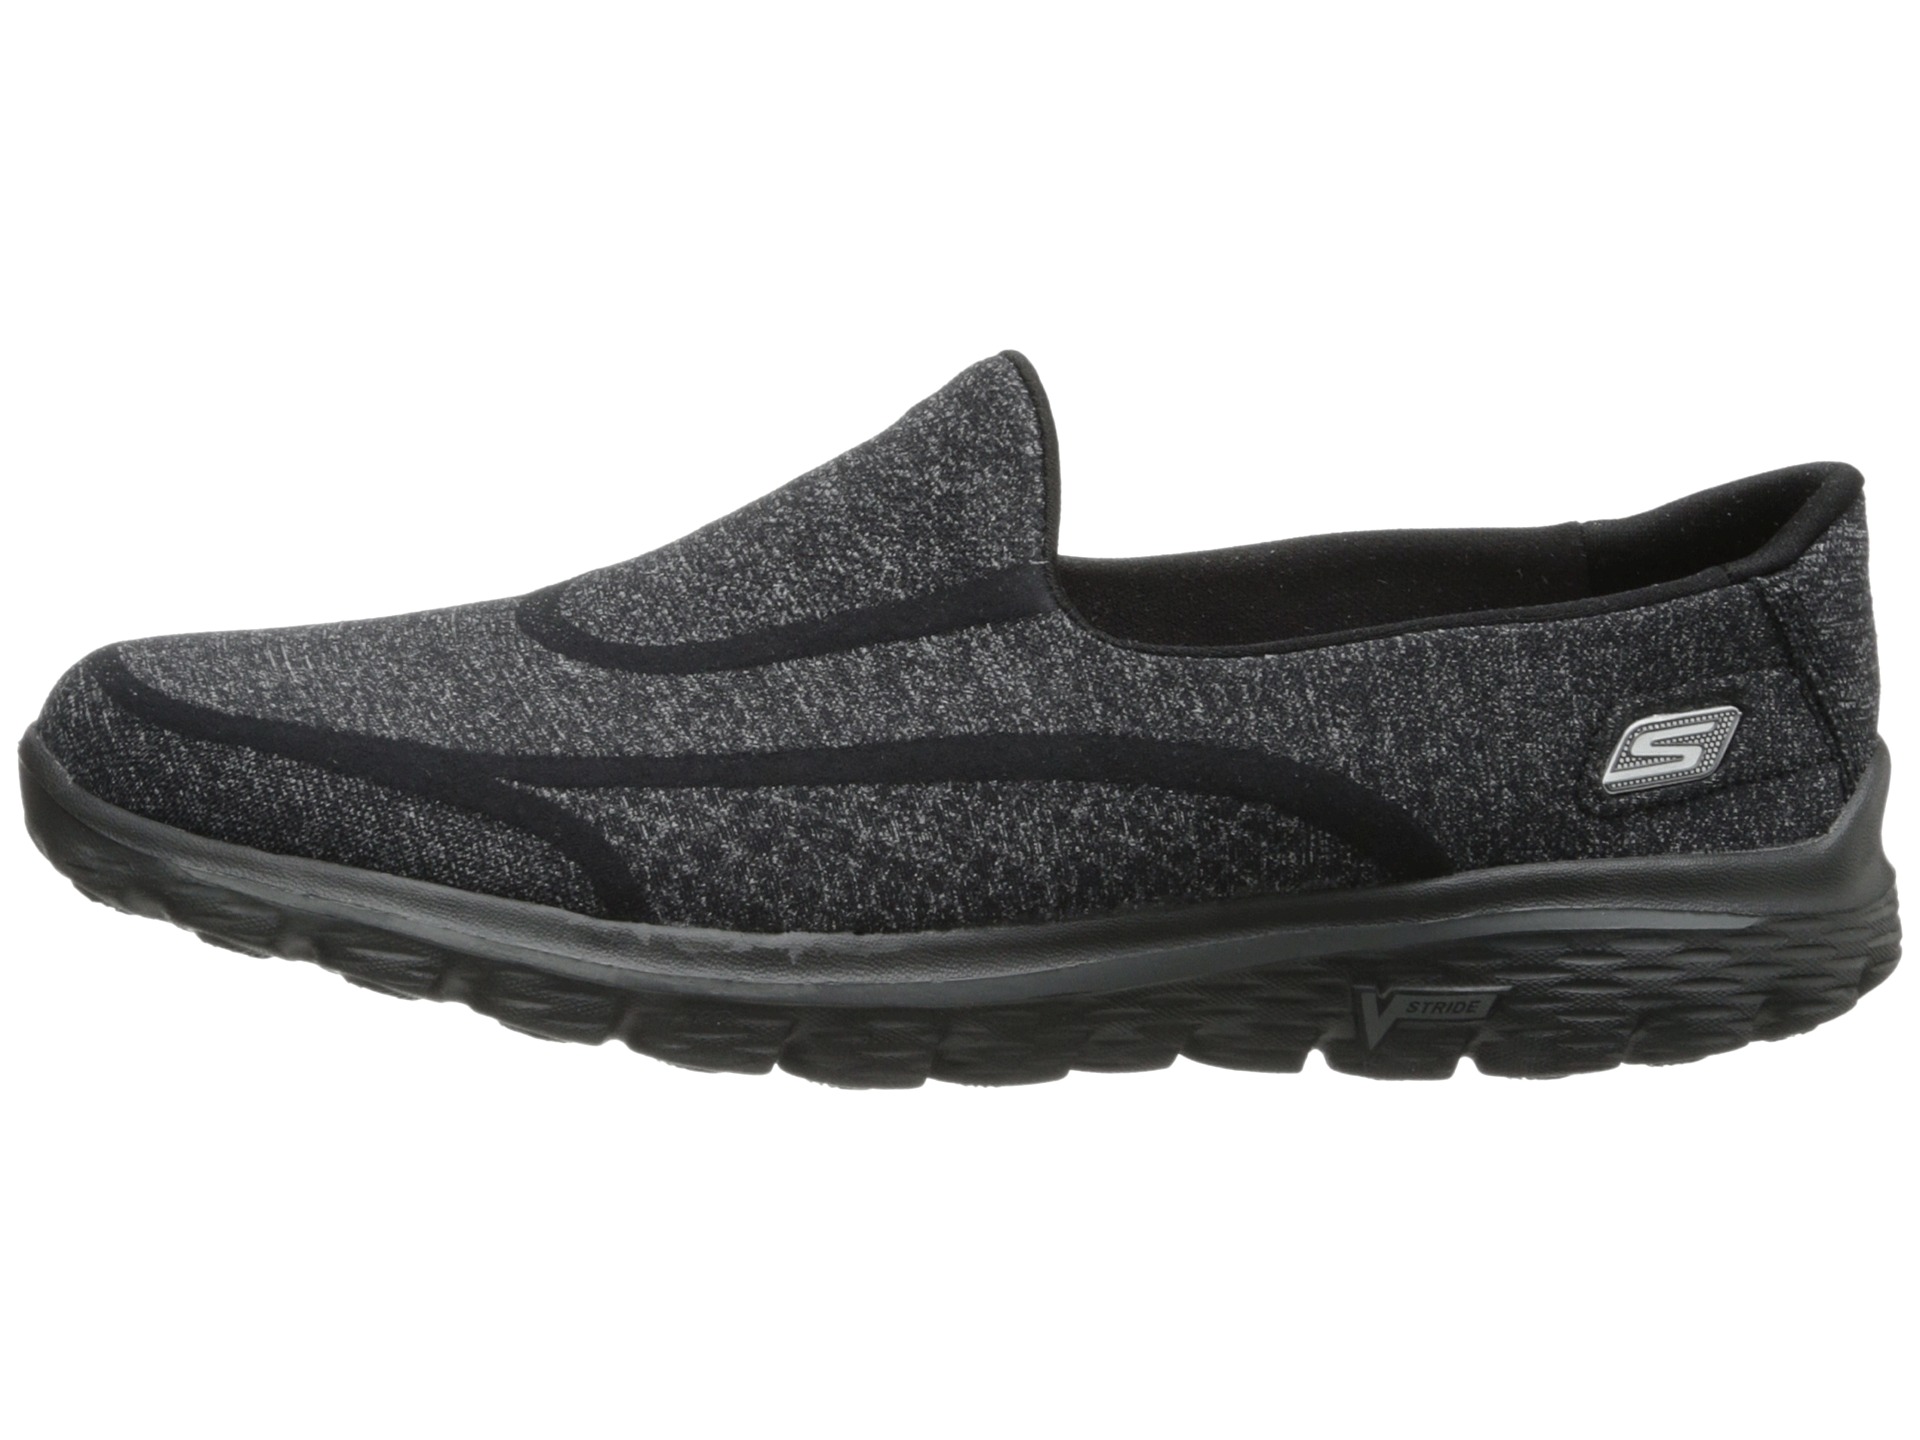 Skechers Performance Go Walk 2 Supersock Black | Shipped Free at Zappos